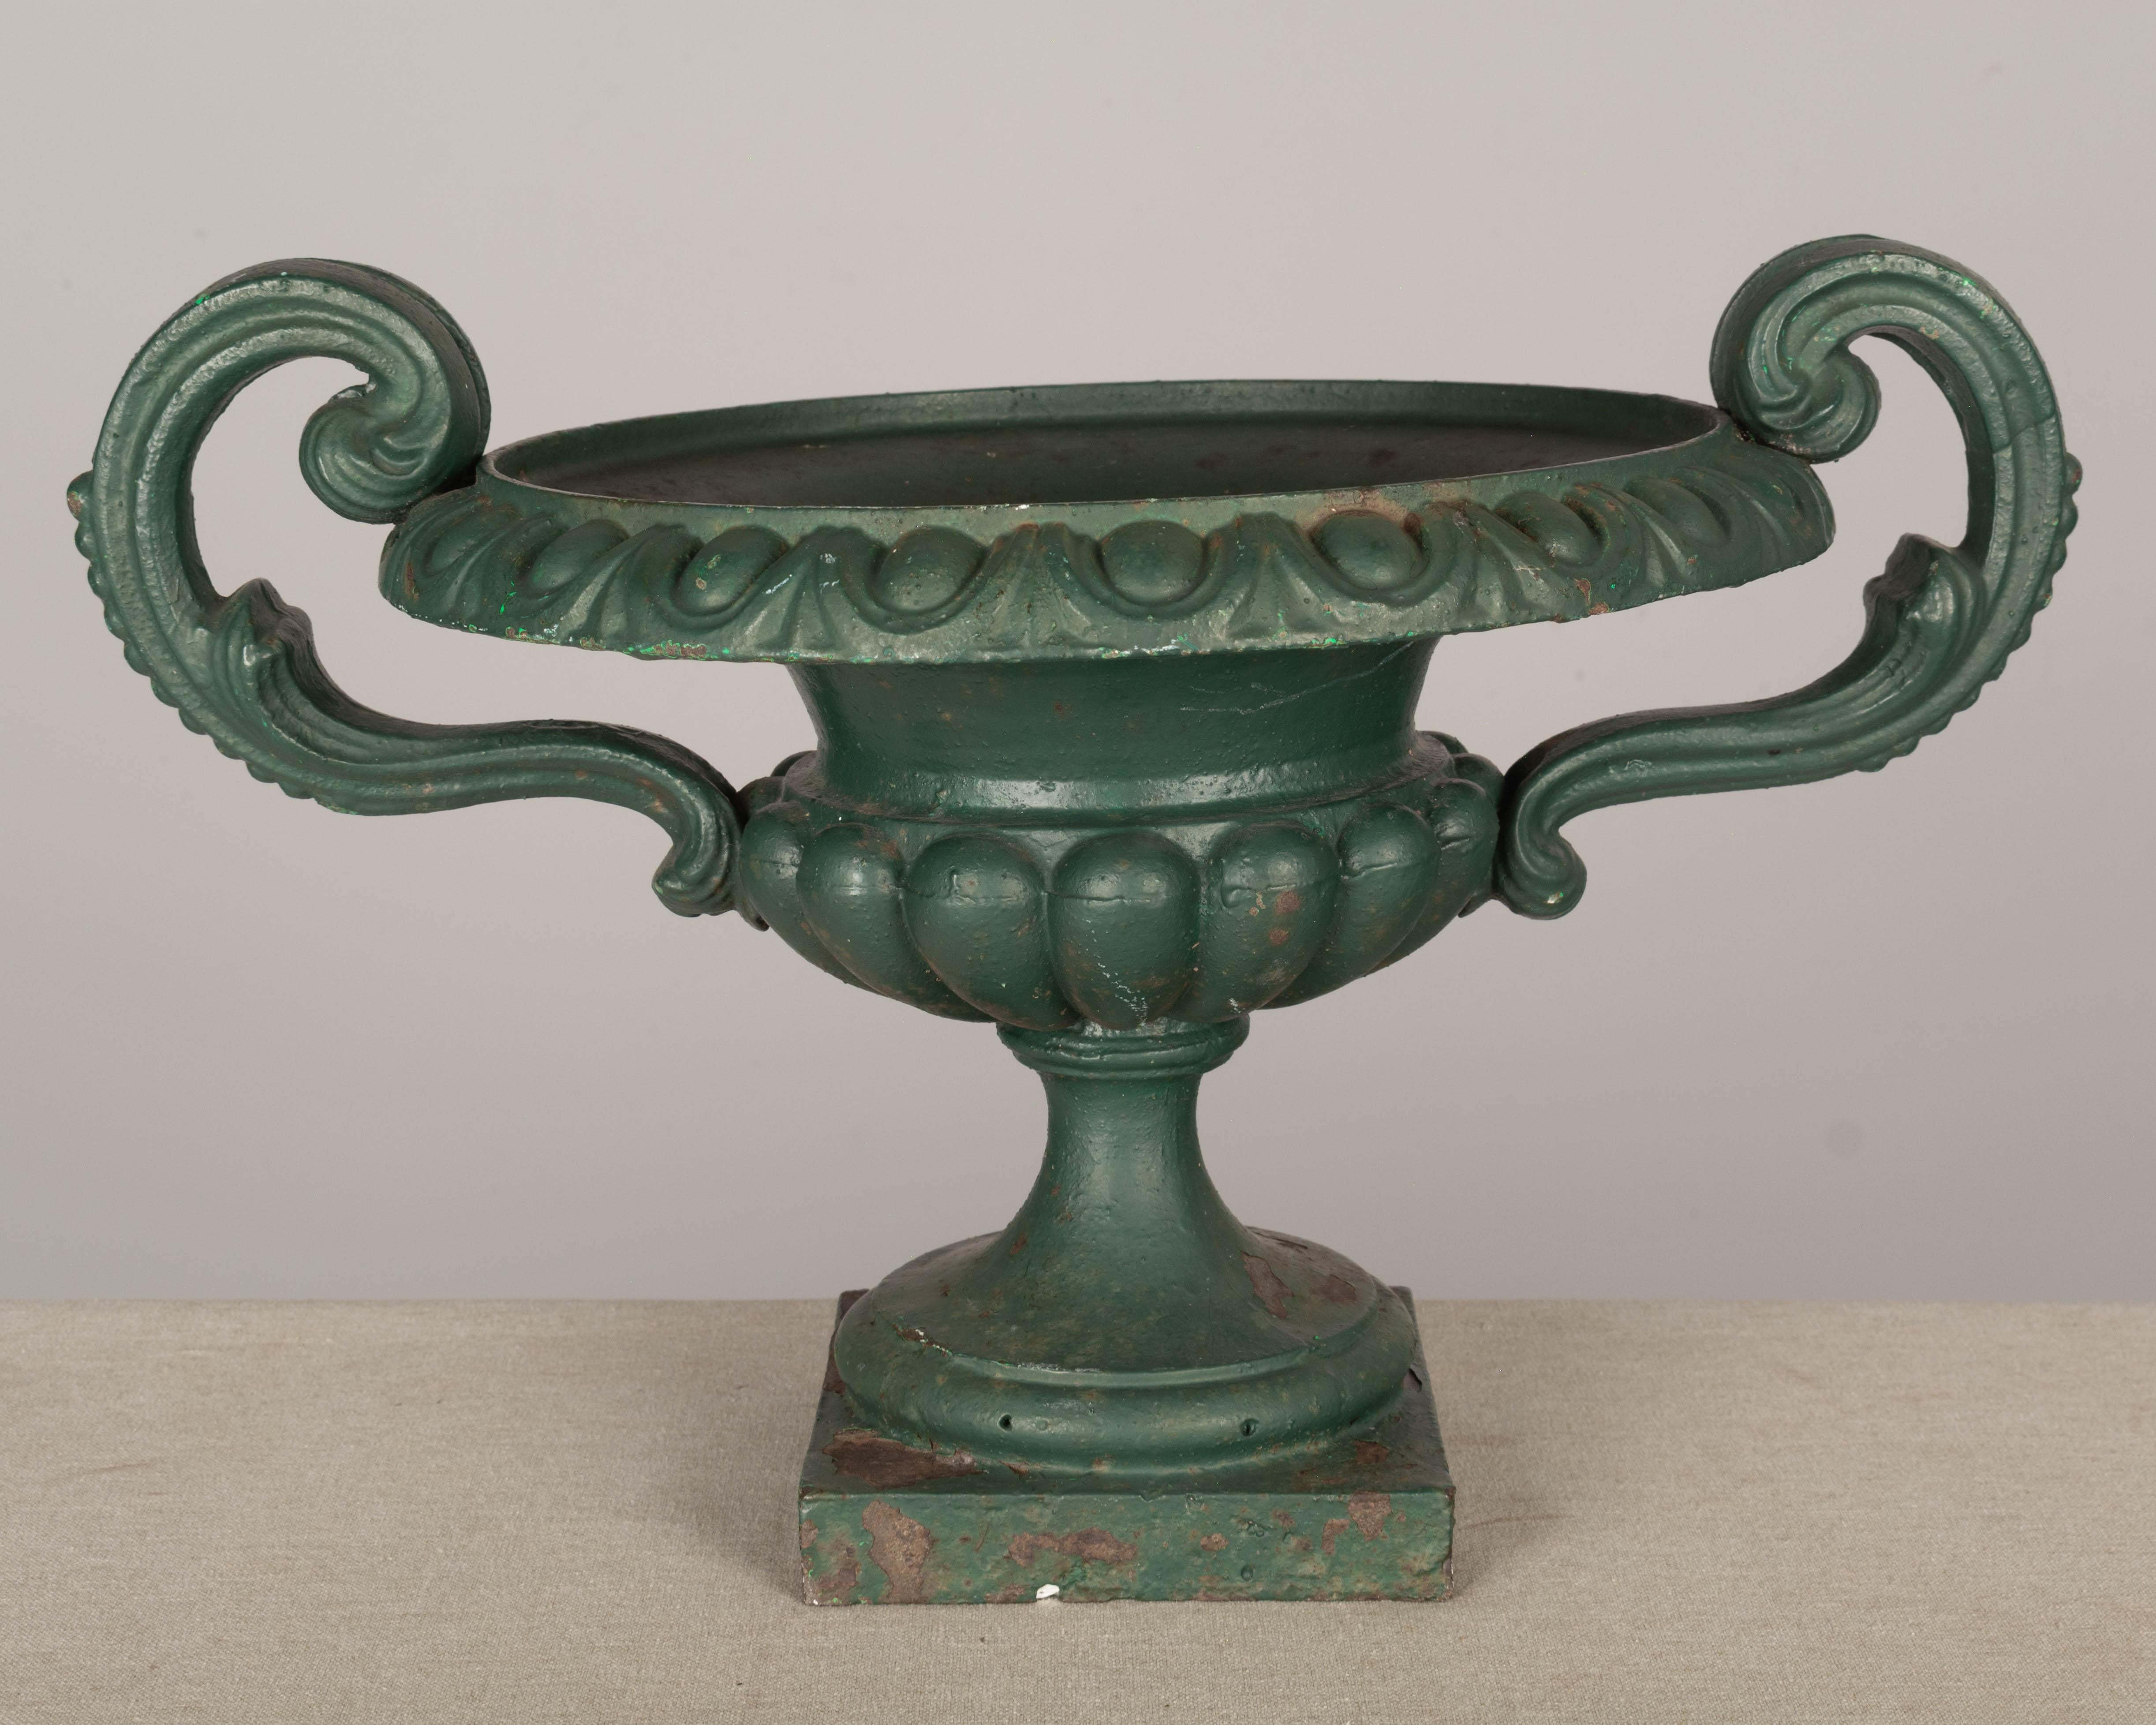 A 19th century French cast iron garden urn planter with handles, pedestal base. Green painted patina with minor losses and some rust. Good condition. Circa 1880-1900. Weight: 25 lbs.
Dimensions: 12